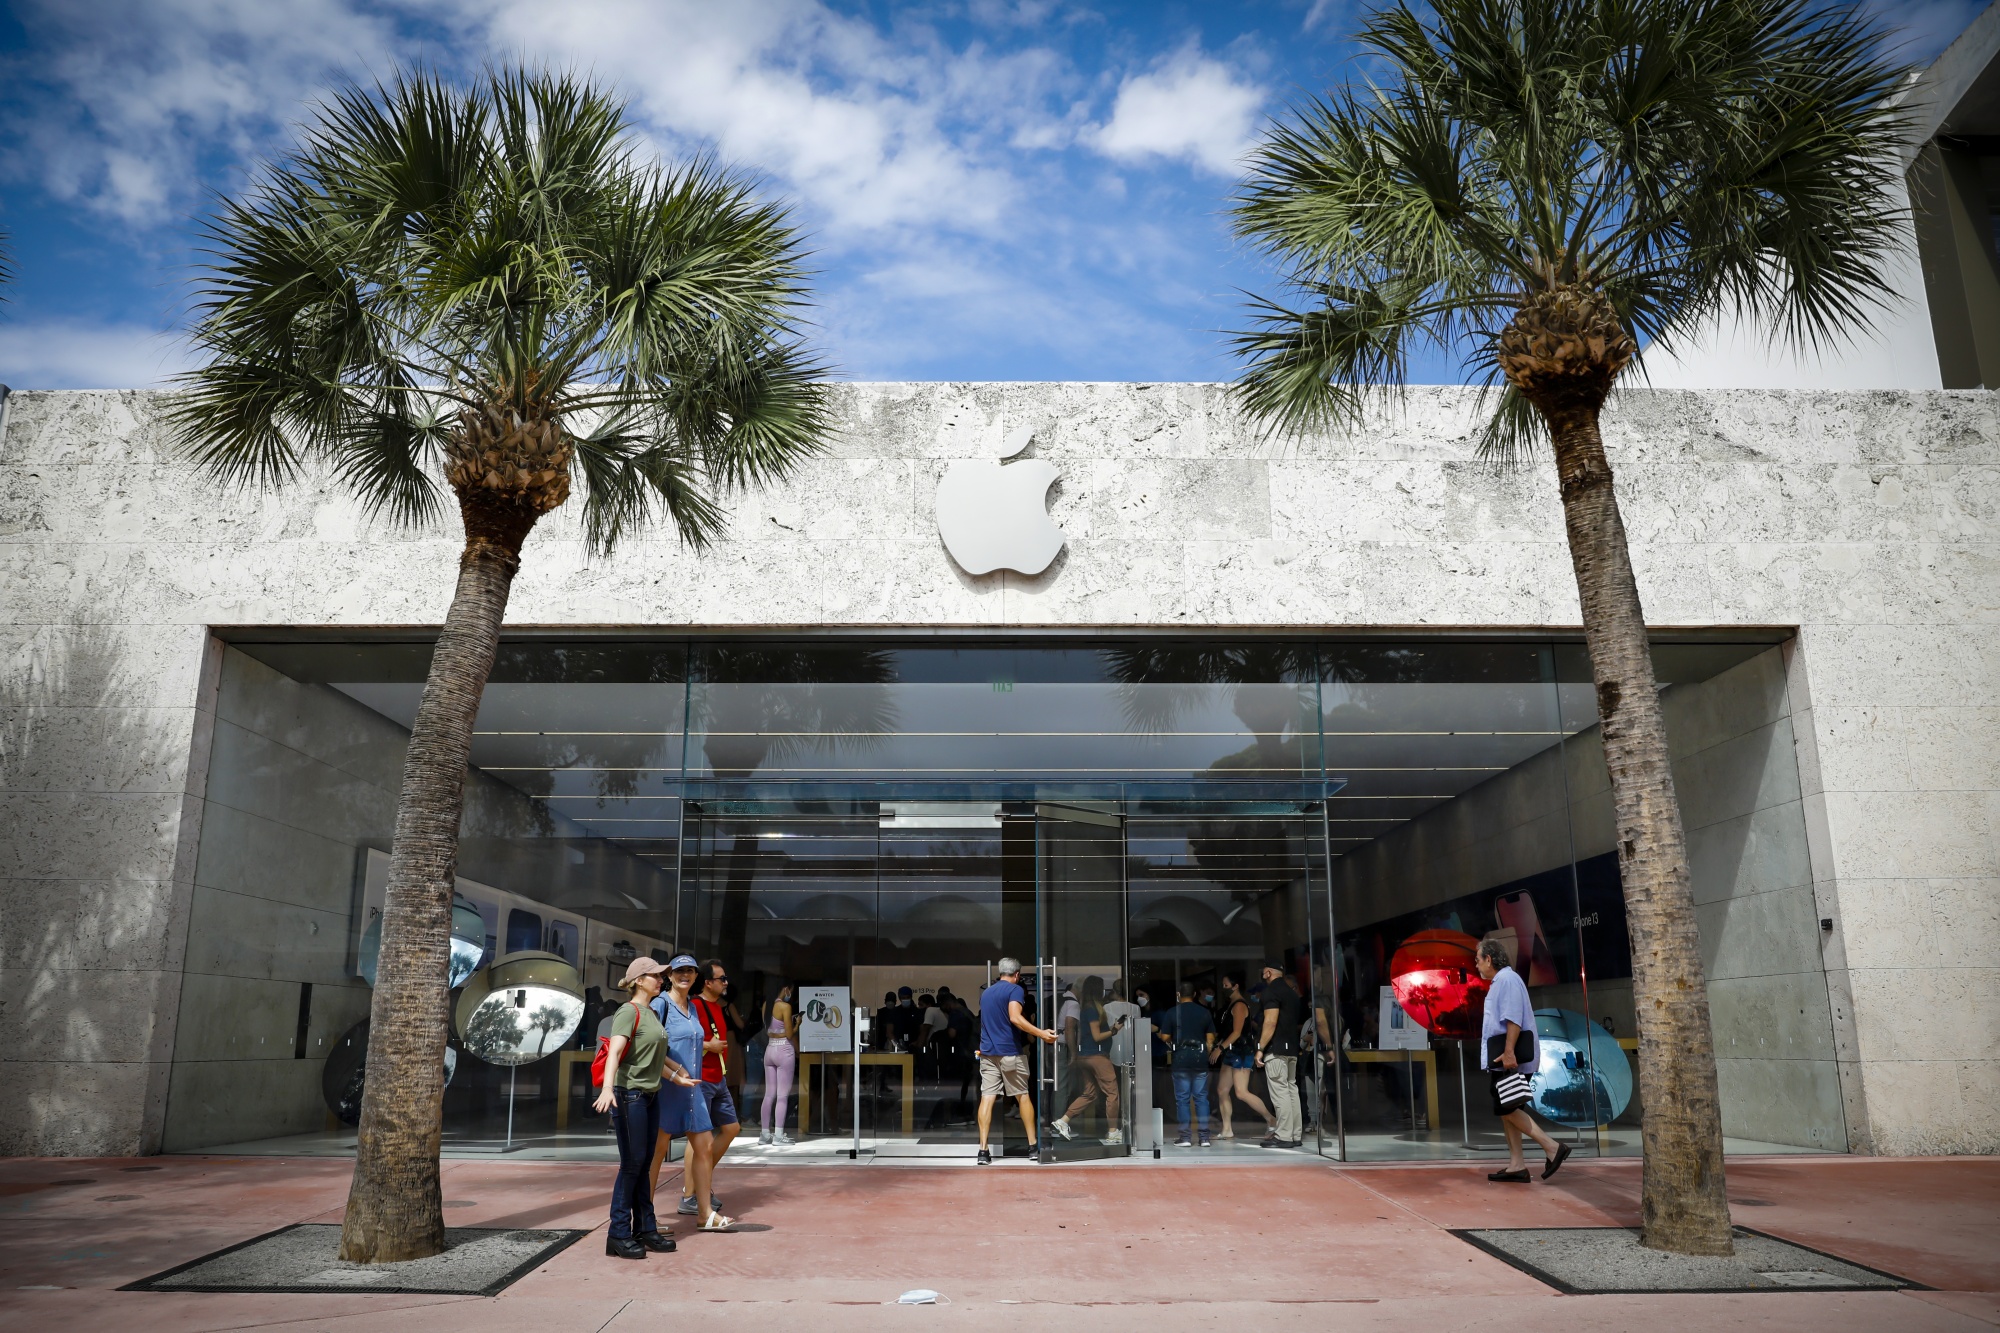 Apple Store, Lincoln Road, Miami Beach, This store appears …